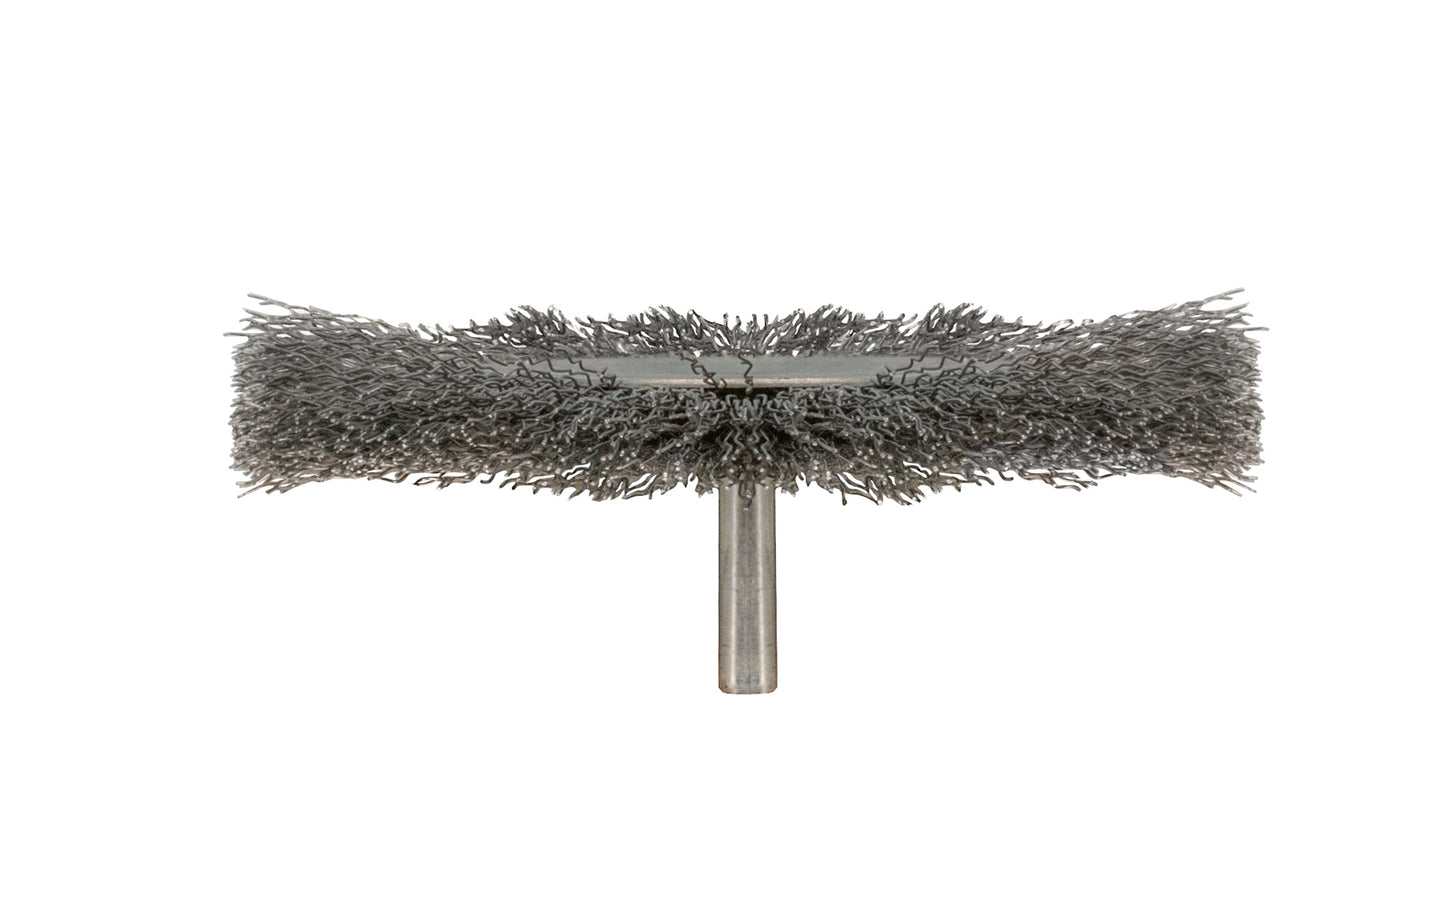 Alfa Tools 3" Coarse Wire Wheel - 1/4" Shank. 0.012" Wire Diameter. 6000 RPM max. All-steel construction. Applications include deburring, blending, removal of rust, scale, dirt, & finish preparation prior to painting or plating.  Made by Alfa Tools.     